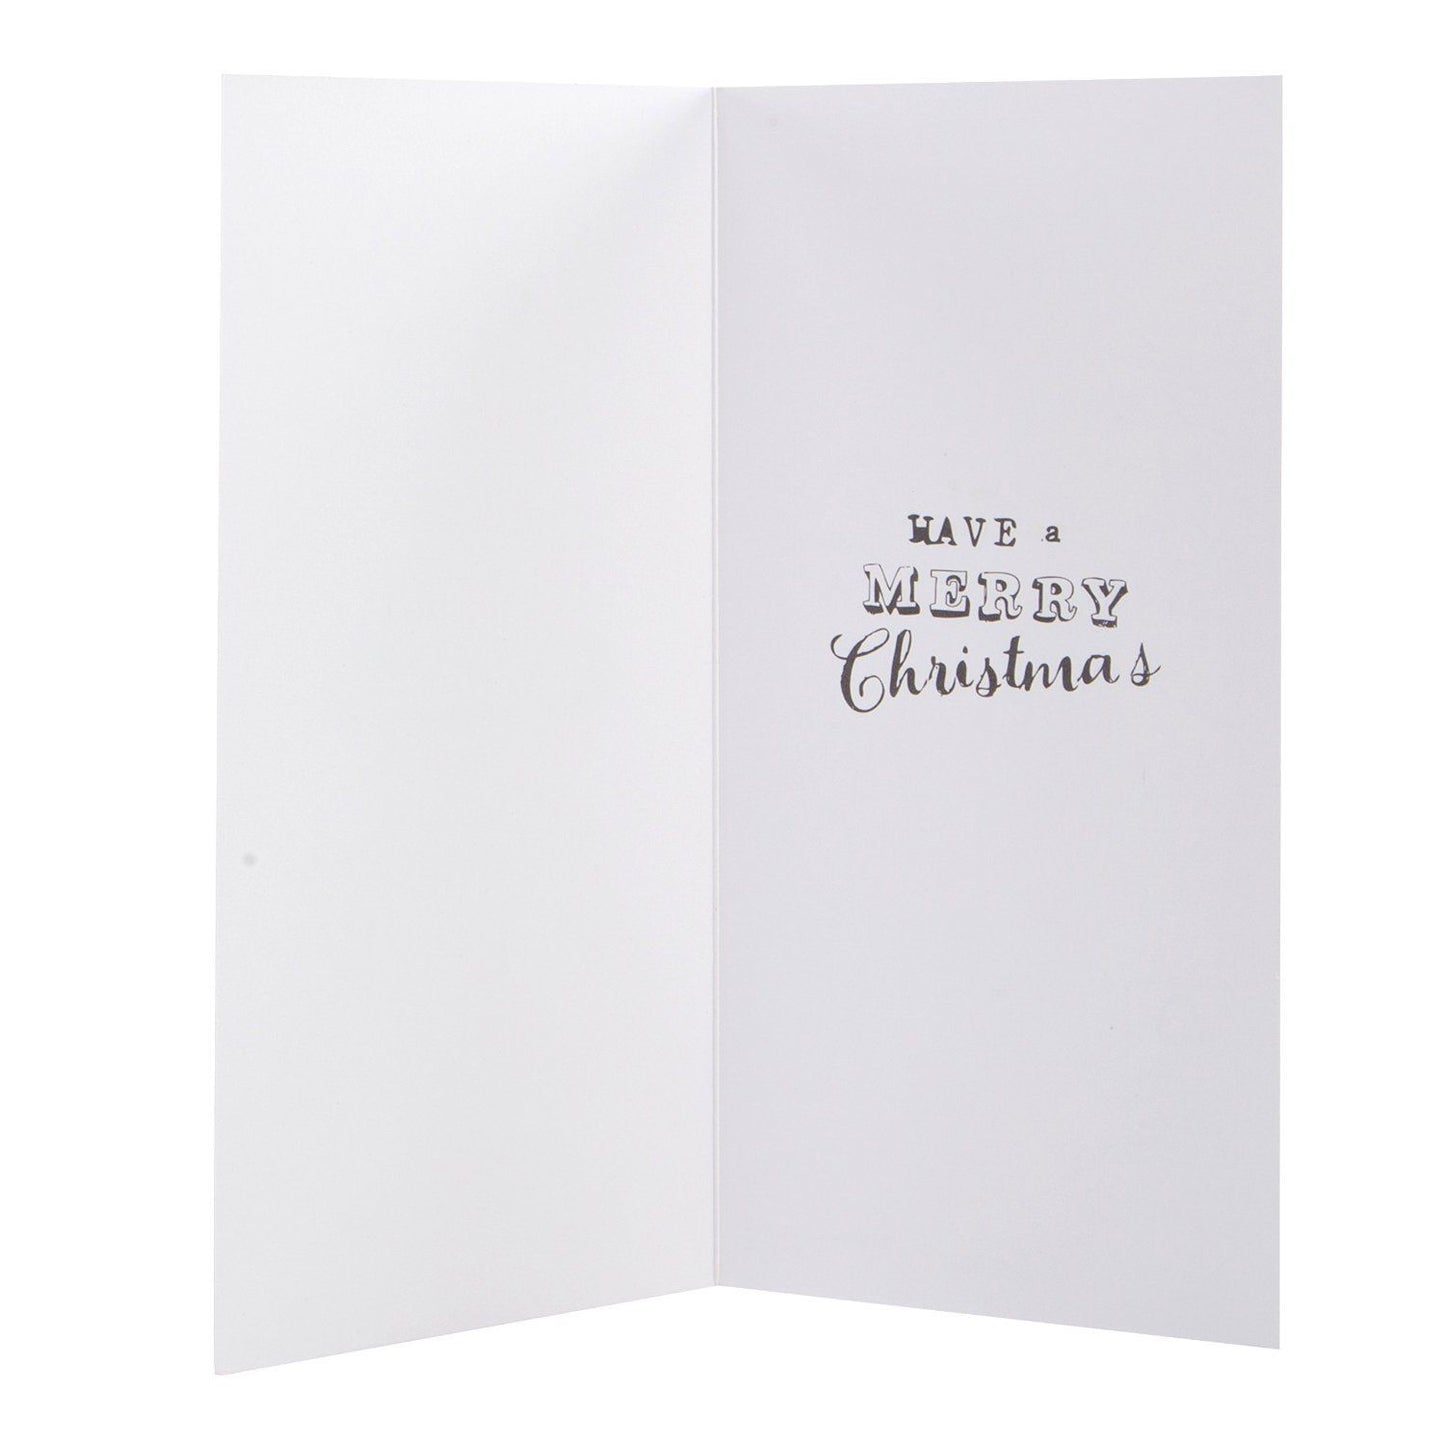 Christmas Boxed Cards Cute Design Pack of 12 with 2 Designs 